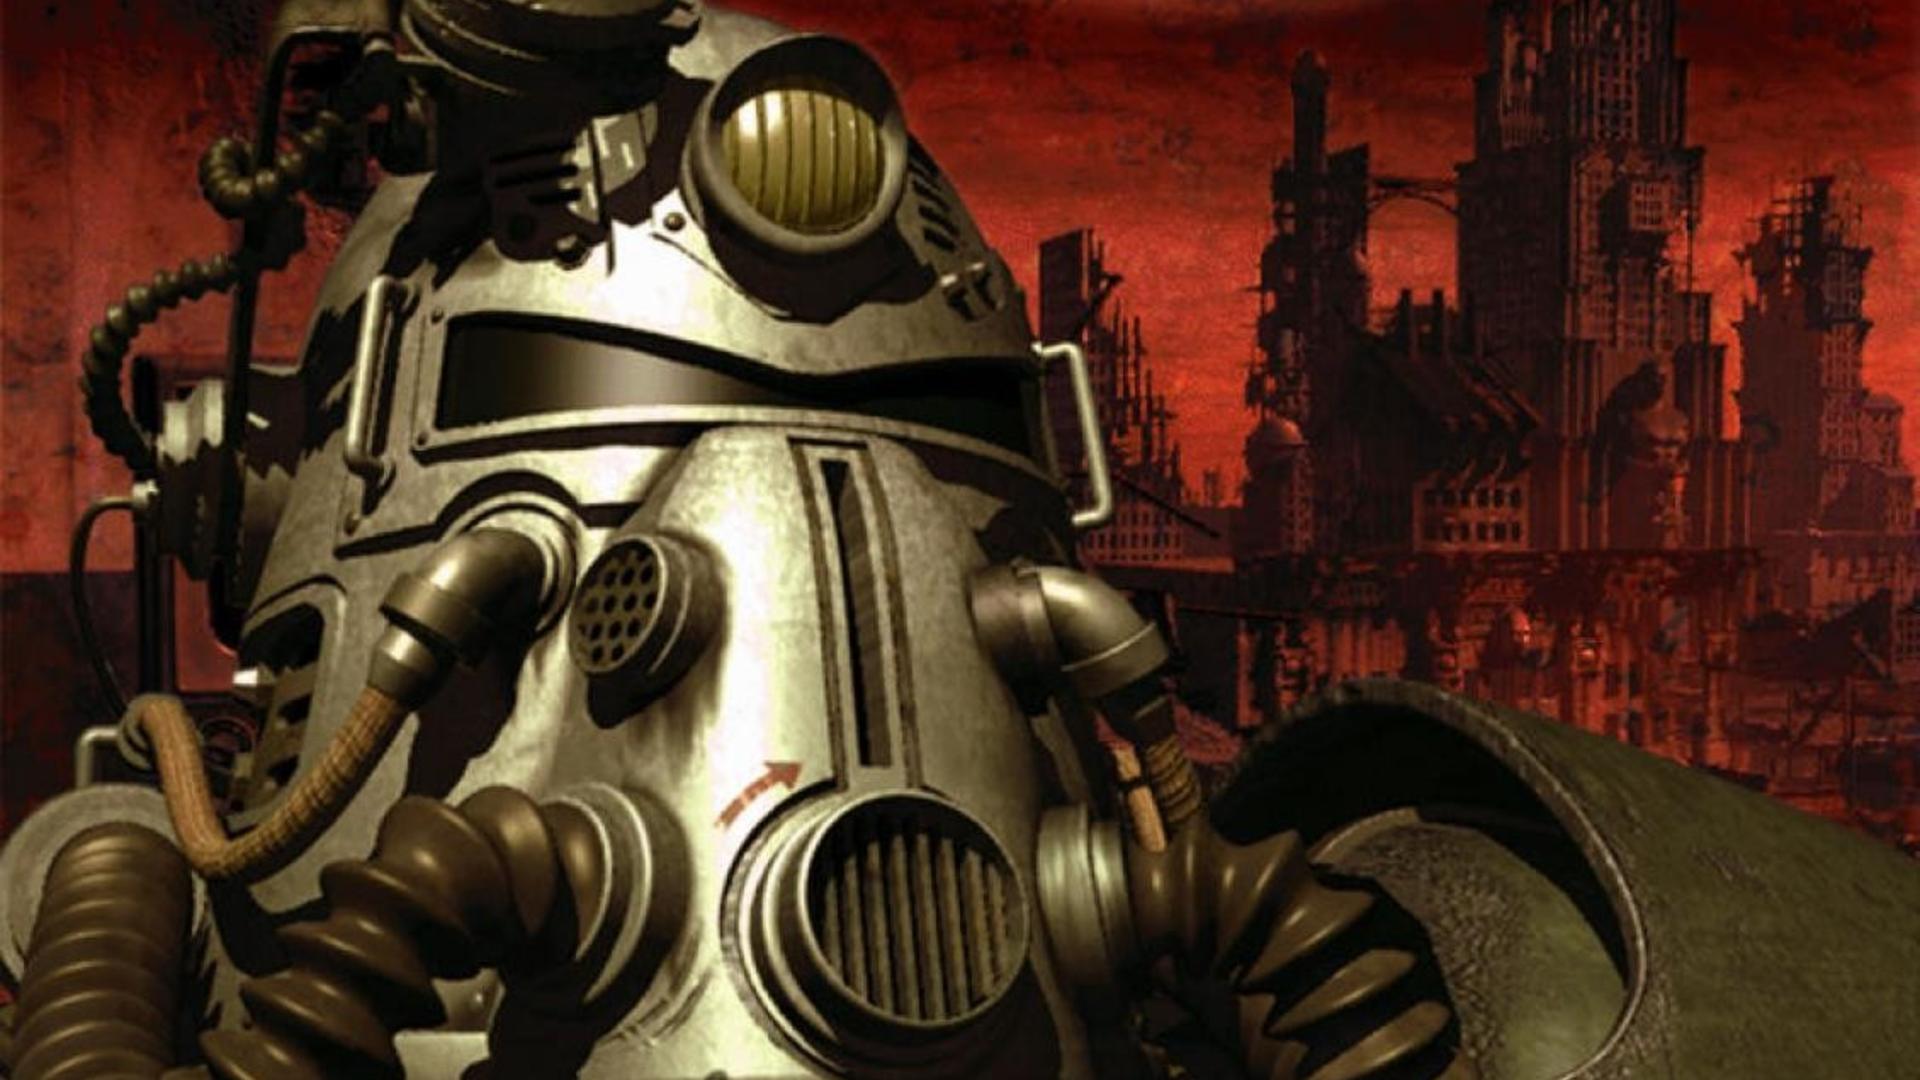 How on Earth did Fallout ever get made?